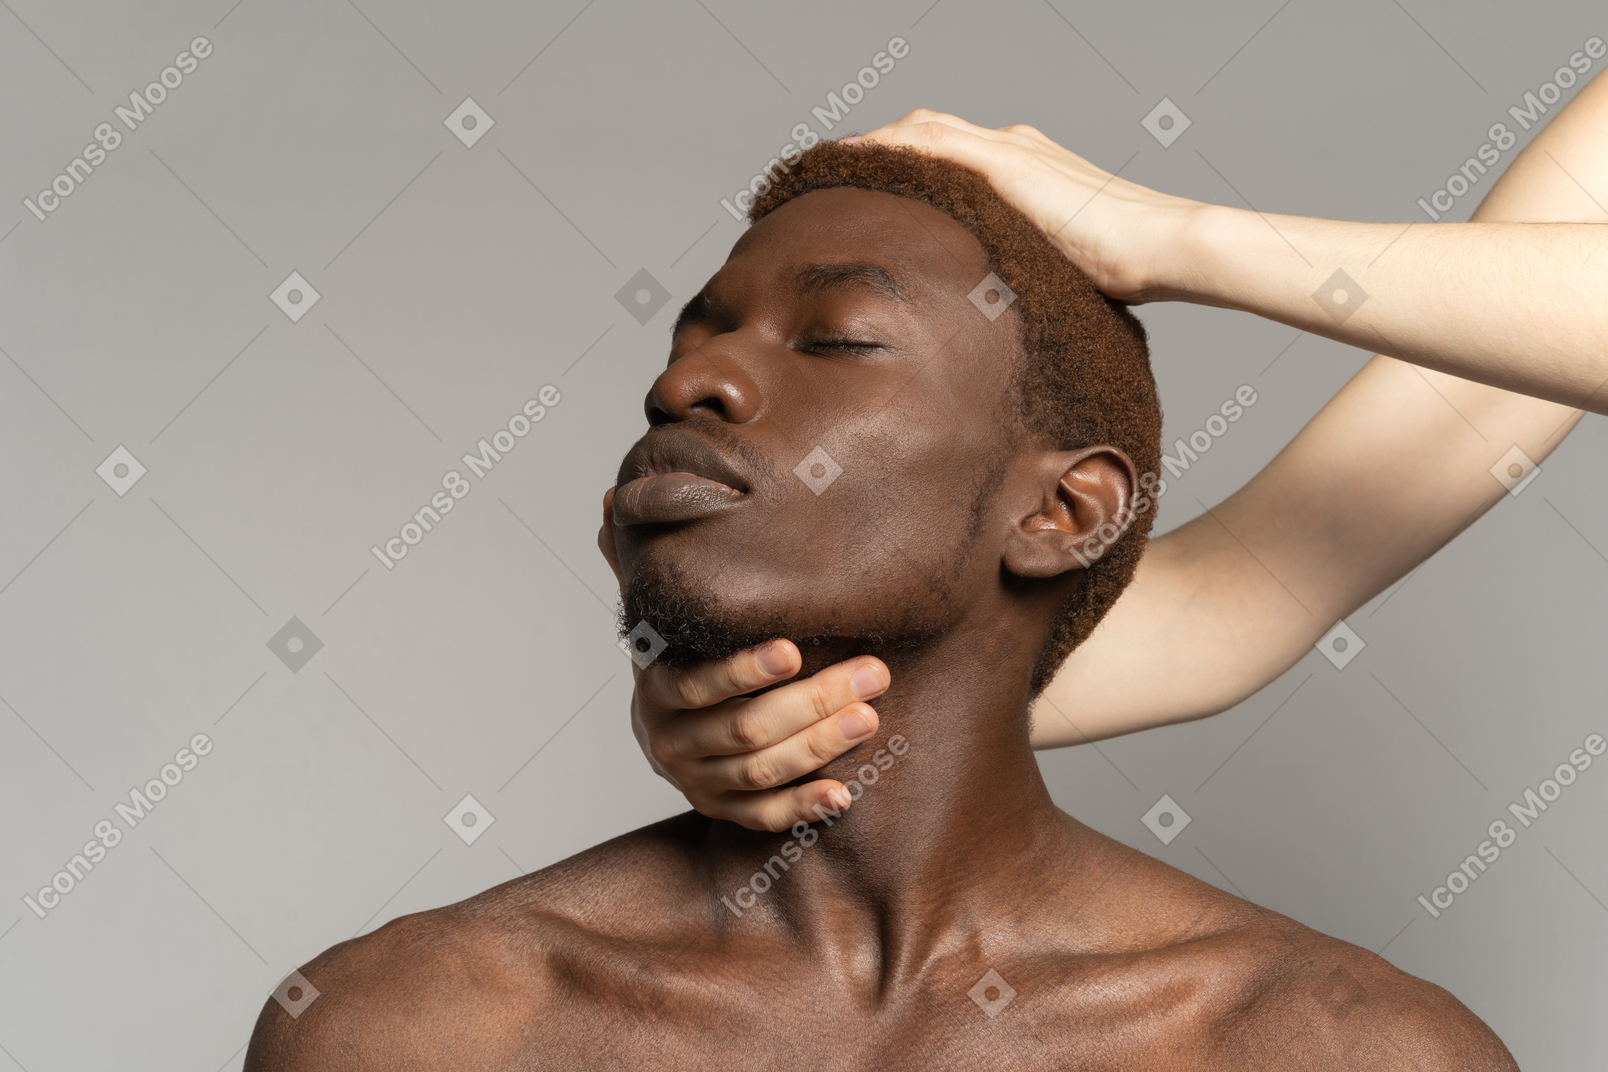 White hand touch neck and head of black man